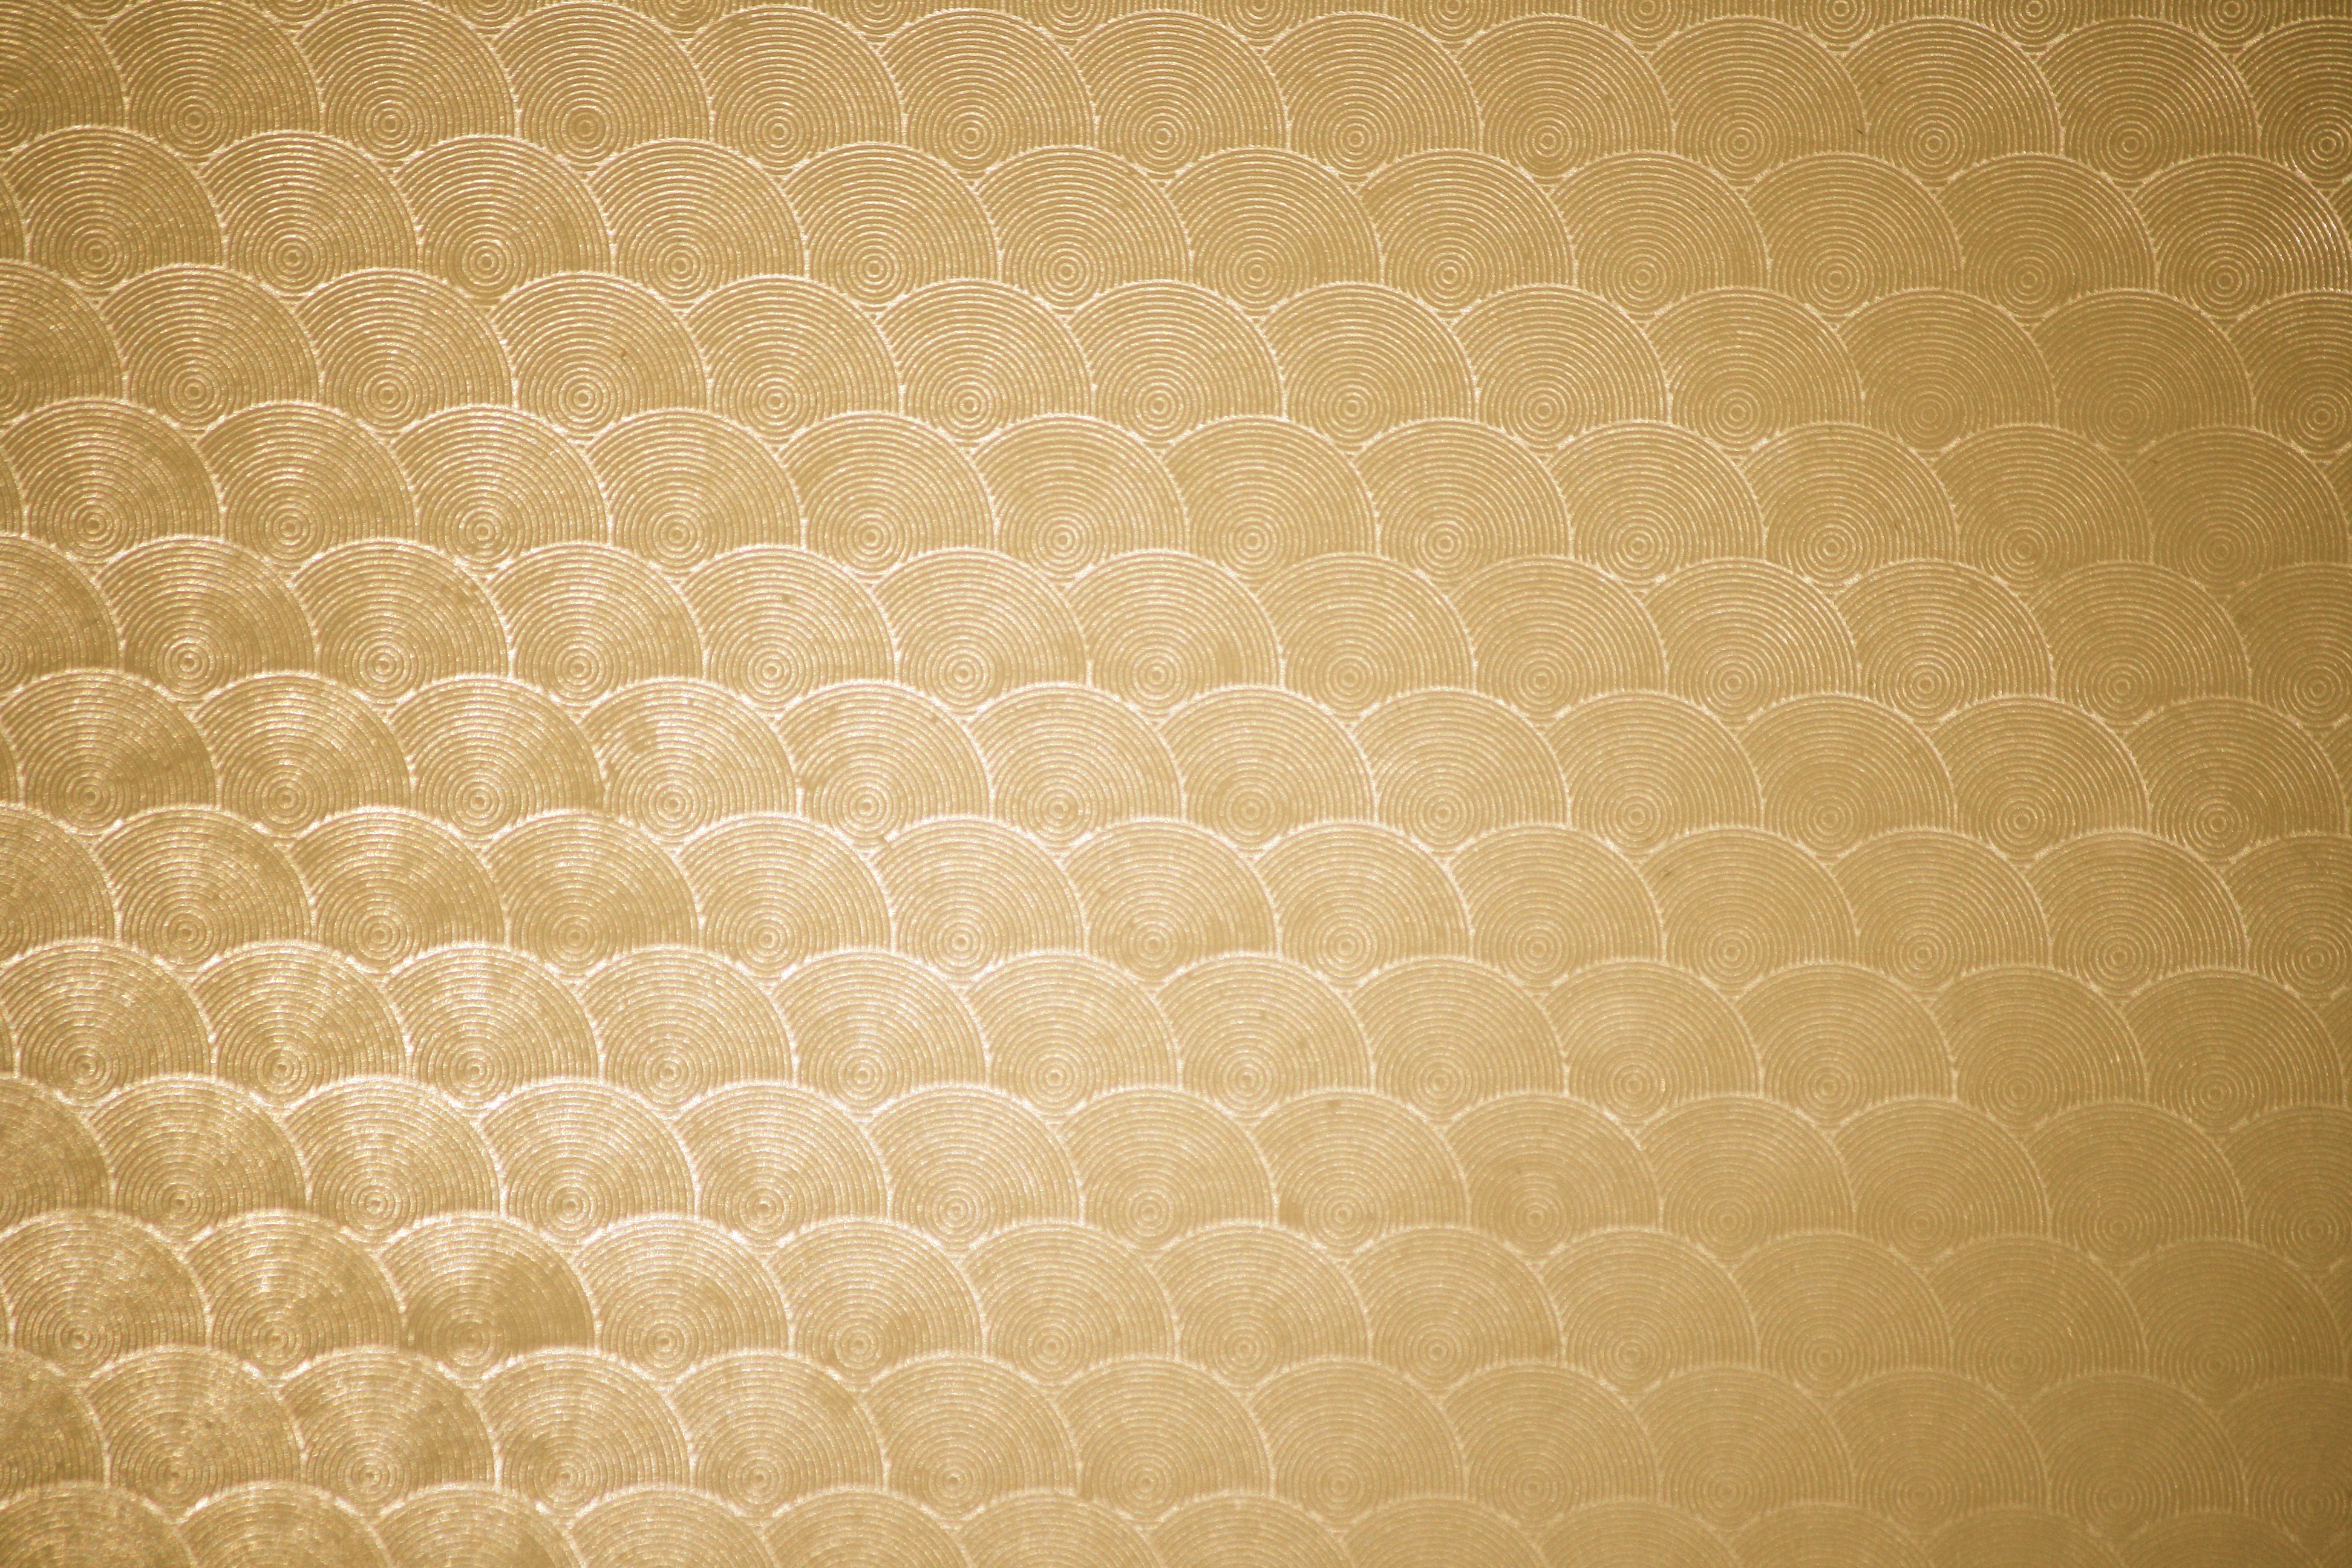 Tan Circle Patterned Plastic Texture High Resolution Photo